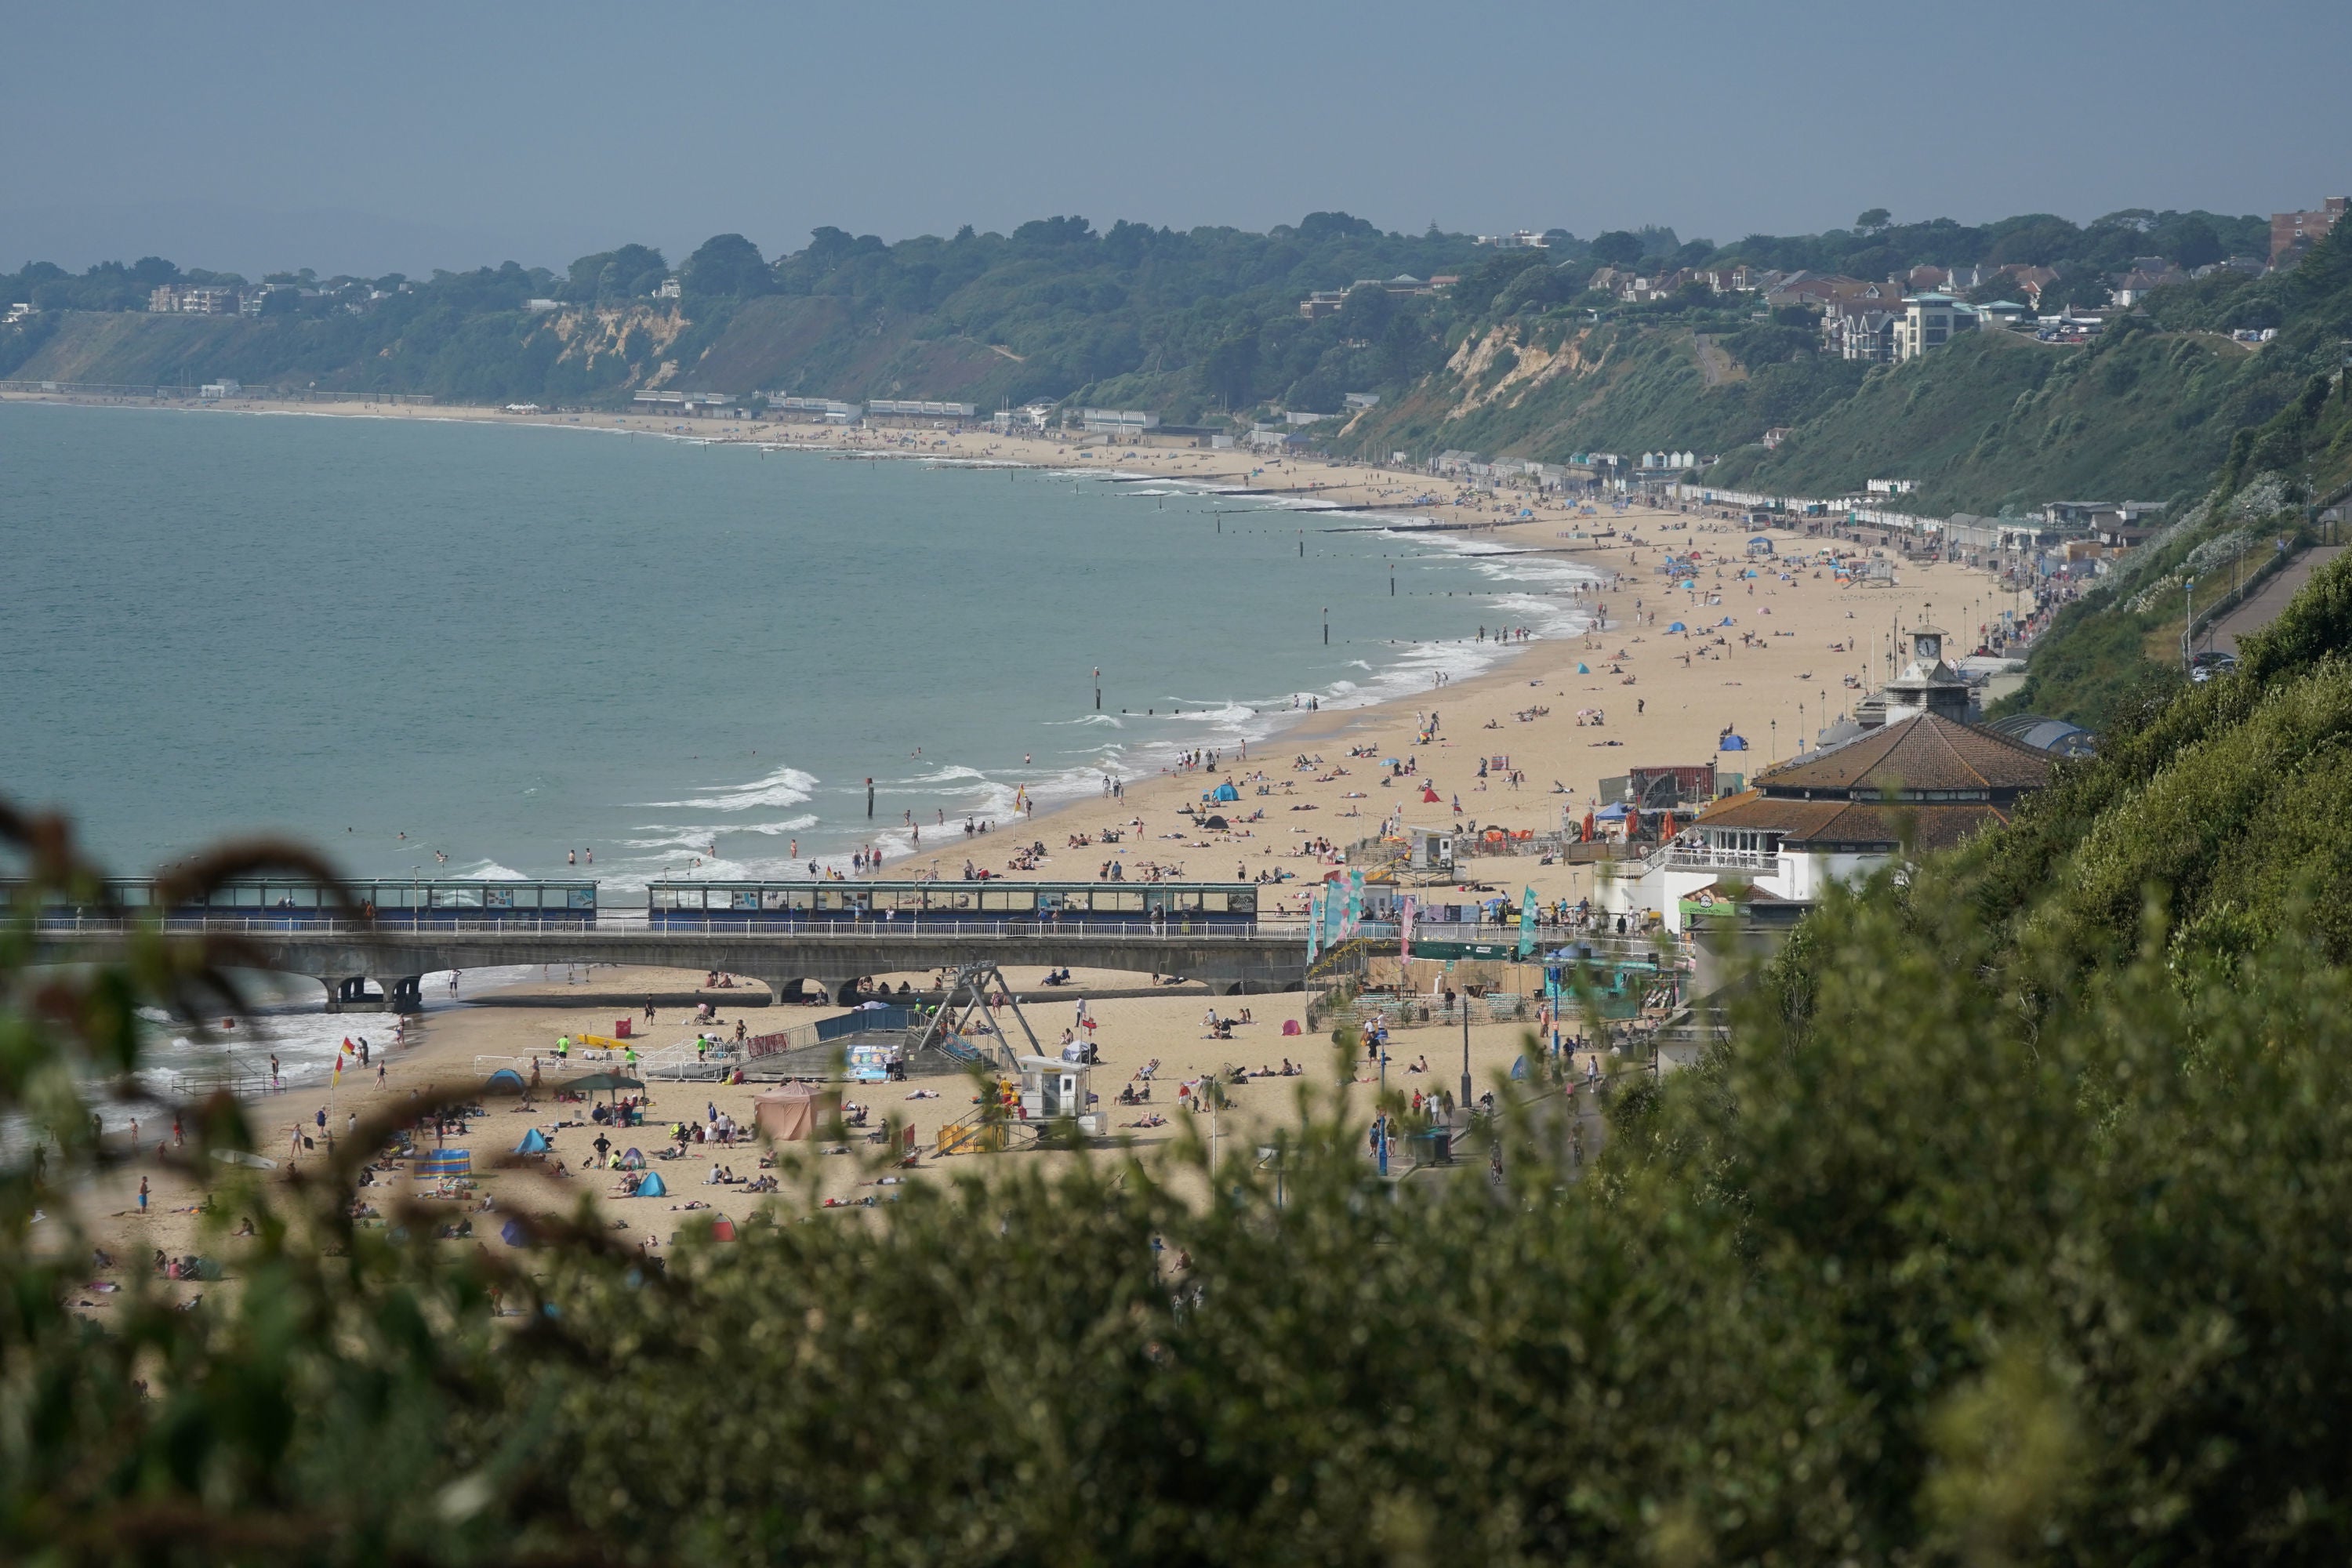 The alleged attack took place on a Sunday afternoon in the sea at Bournemouth beach